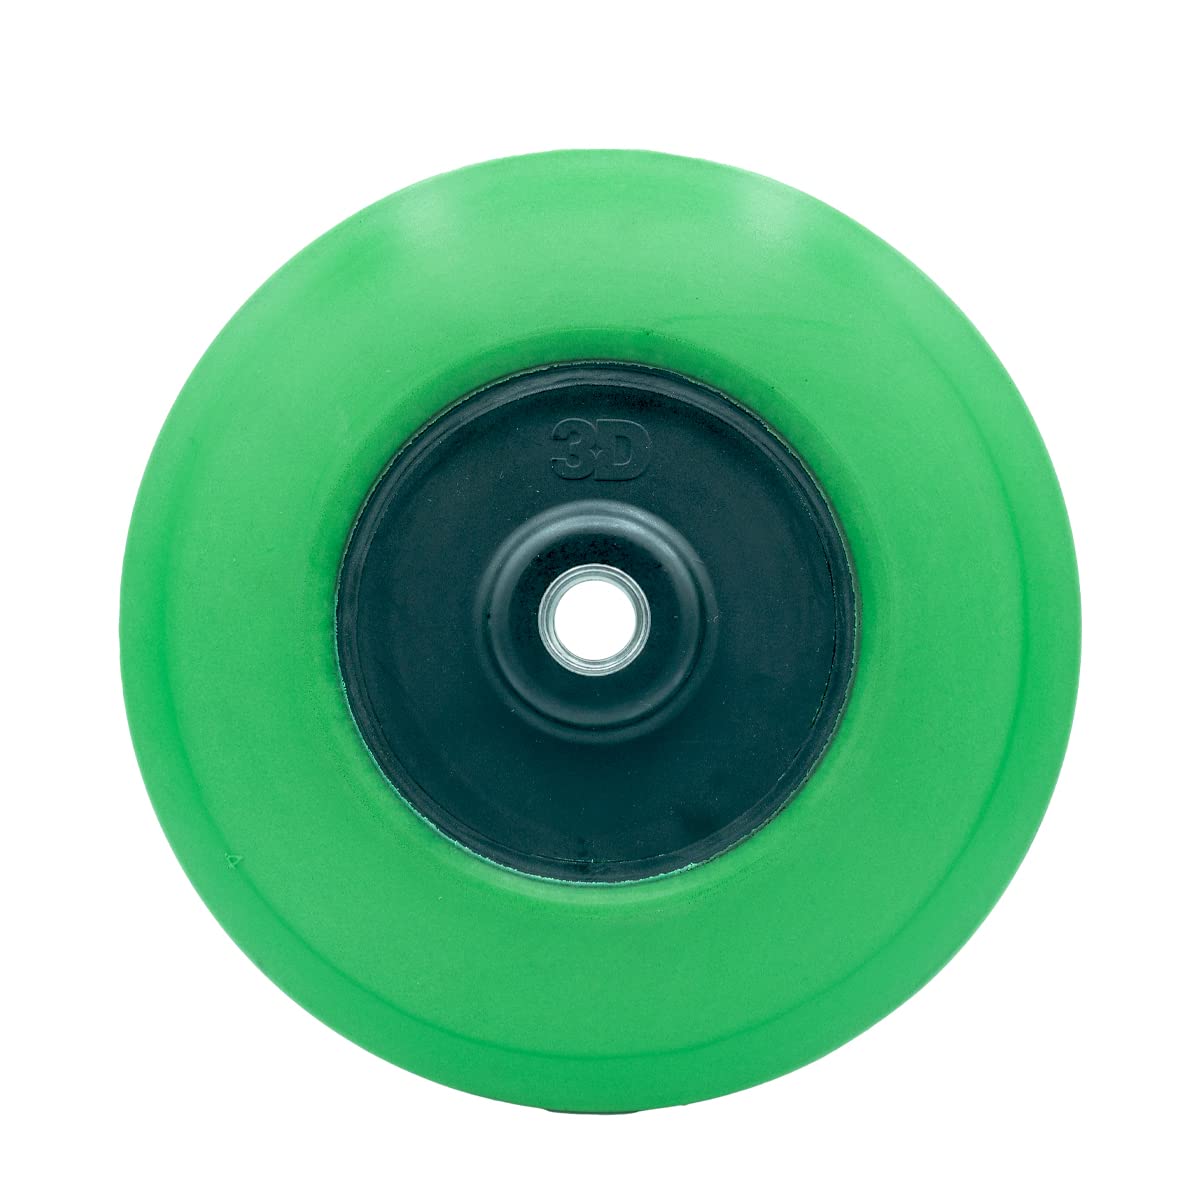 3D 6” Green Rotary Backing Plate | 5/8” Thread | Hook-and-Loop System | Flexible Backing Pad for Rotary Polisher | Sanding, Polishing, Buffing | Professional Grade